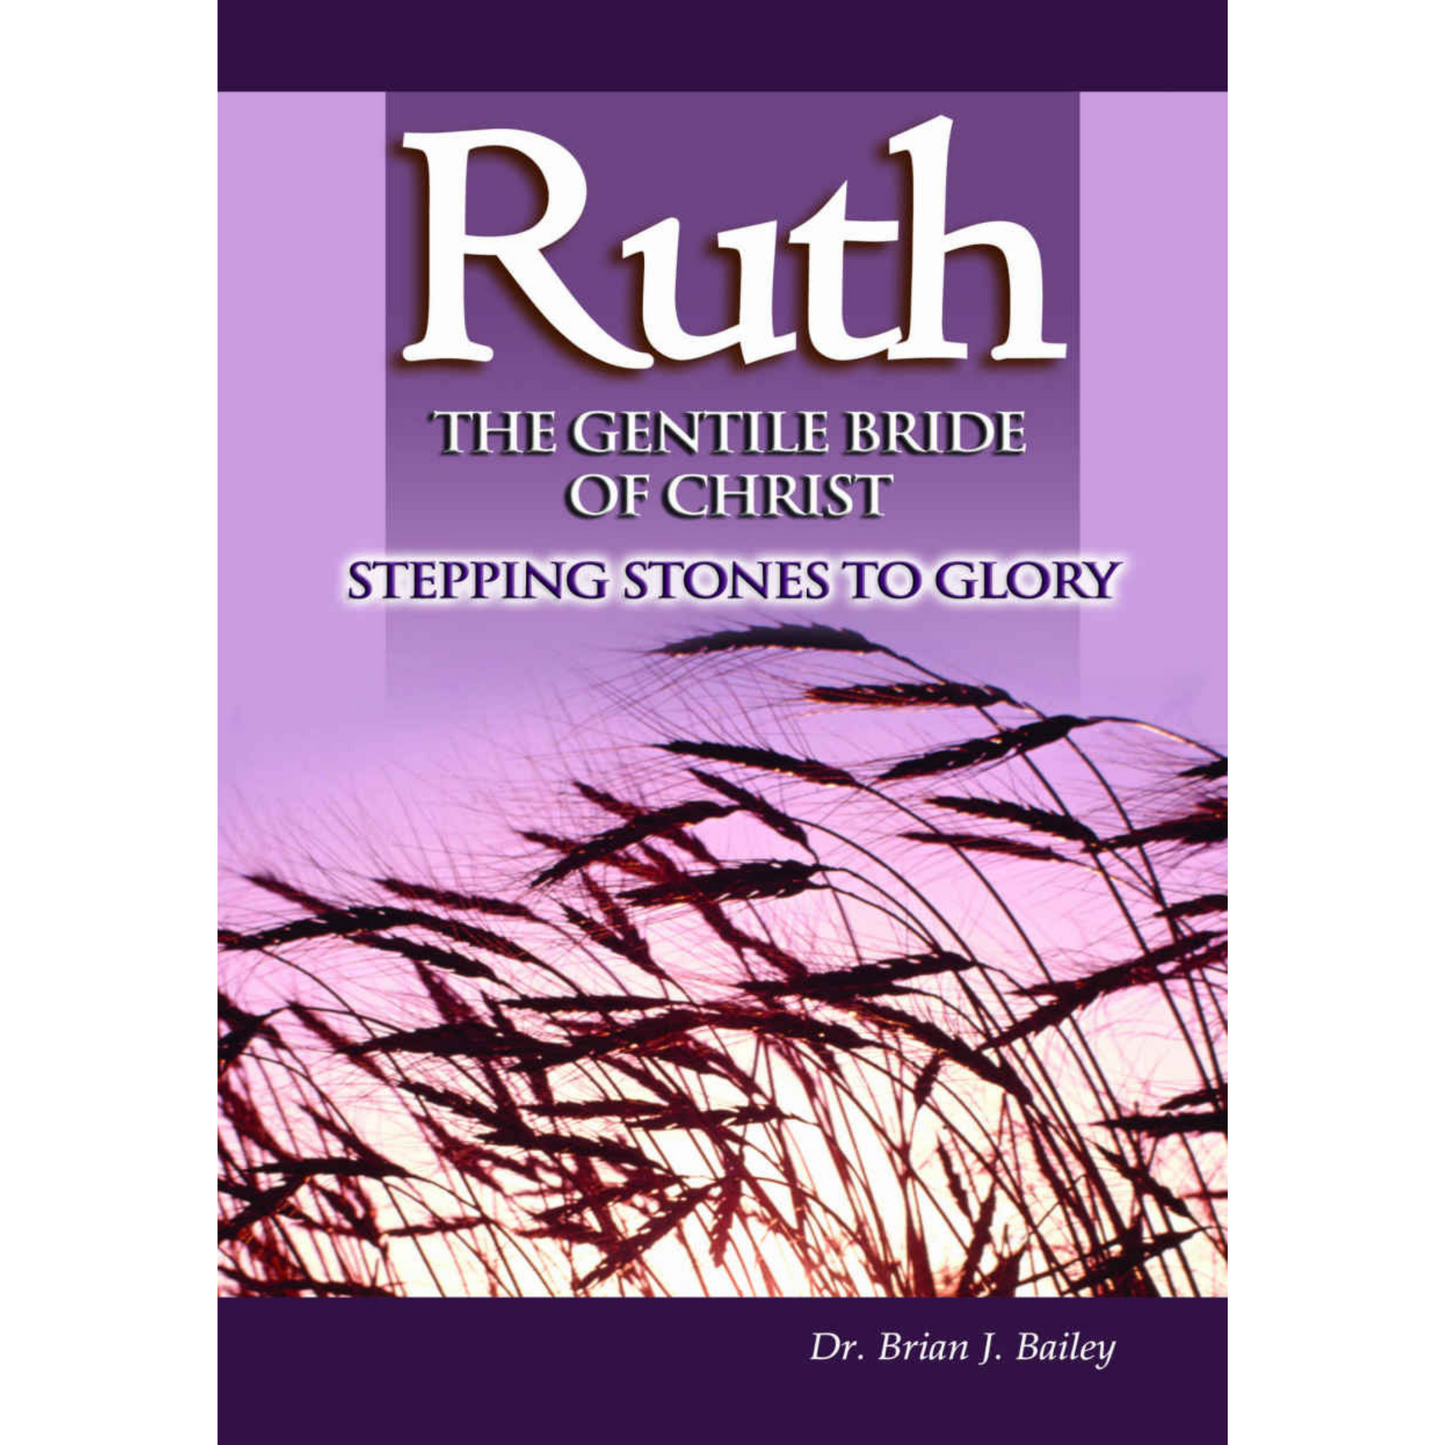 Ruth: The Gentile Bride of Christ